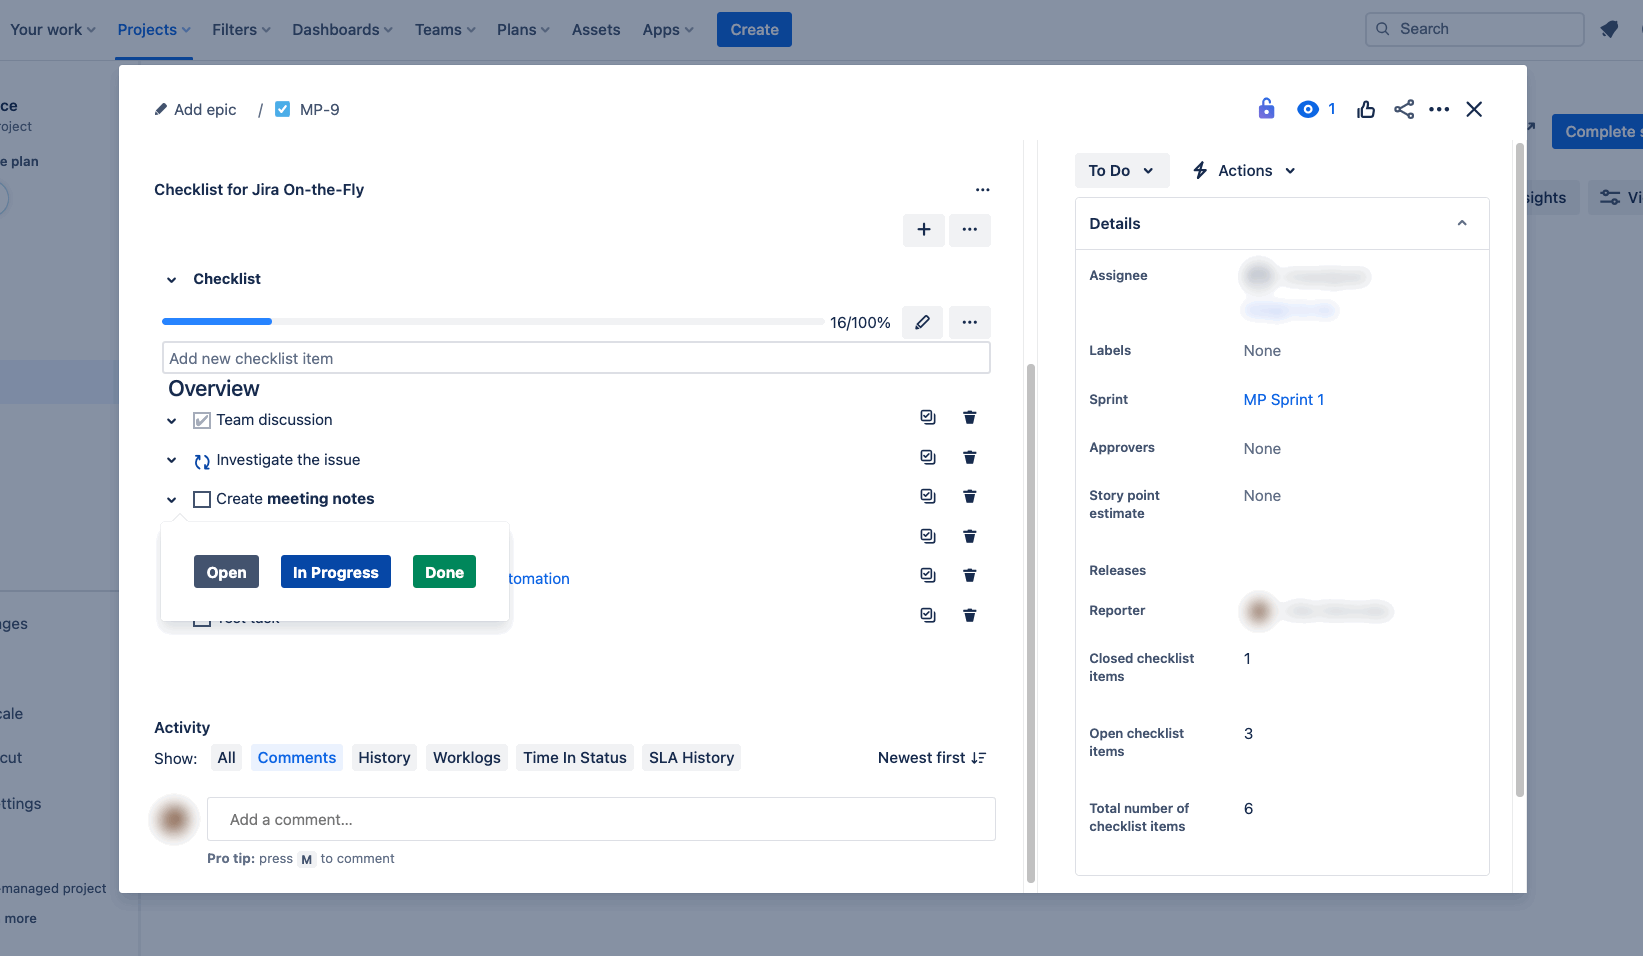 Getting Started - Use Checklist for Jira On-the-Fly (1).gif